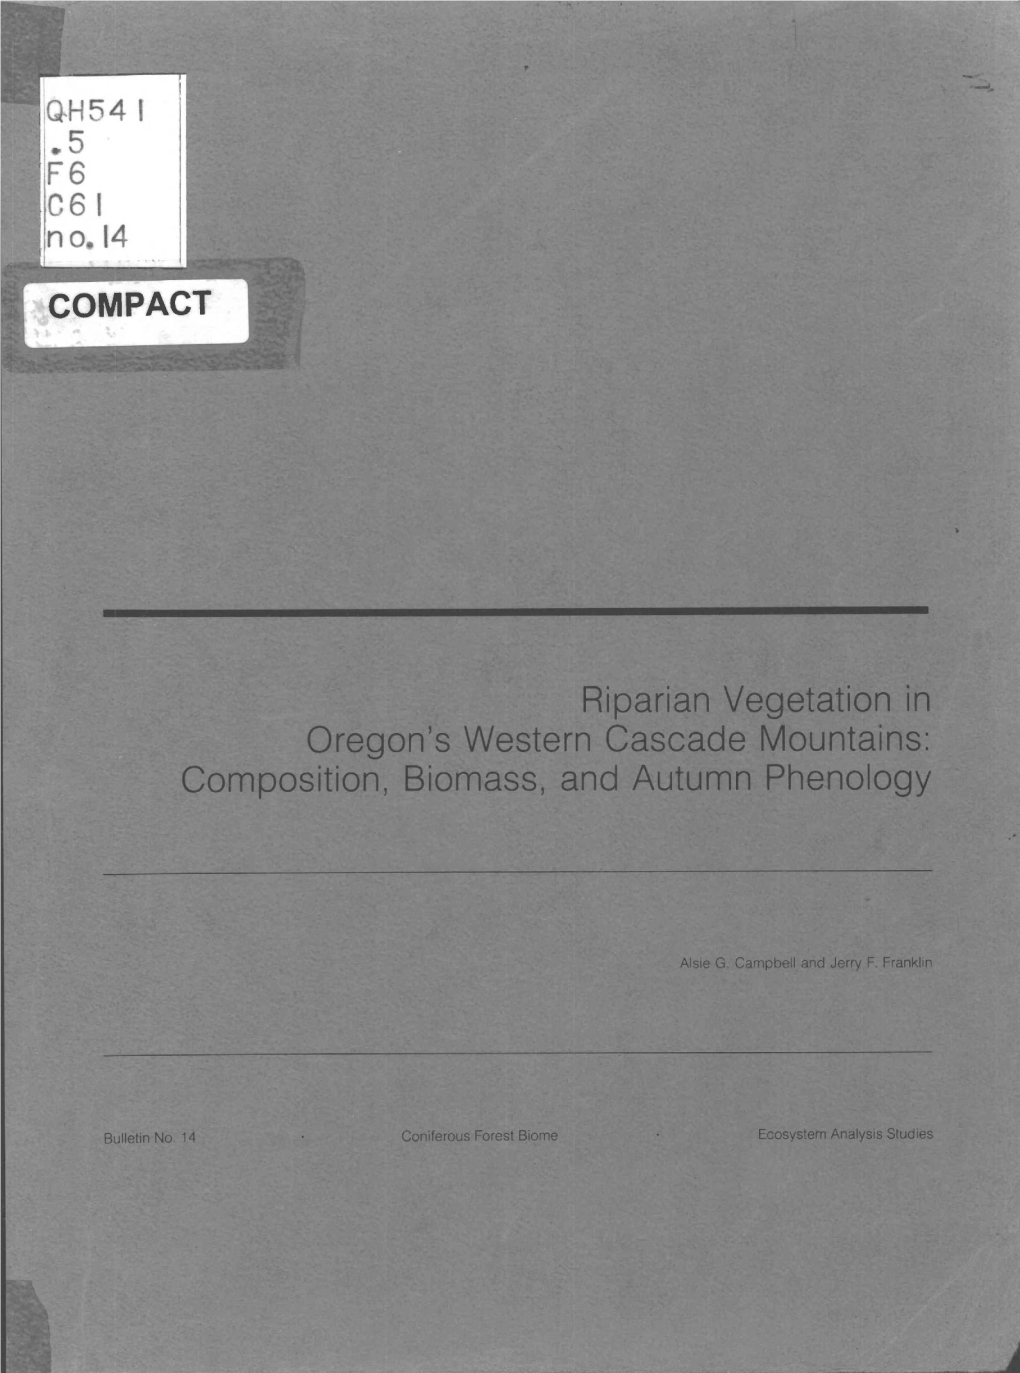 Oregon's Western Cascade Mountains: Composition, Biomass, and Autumn Phenology